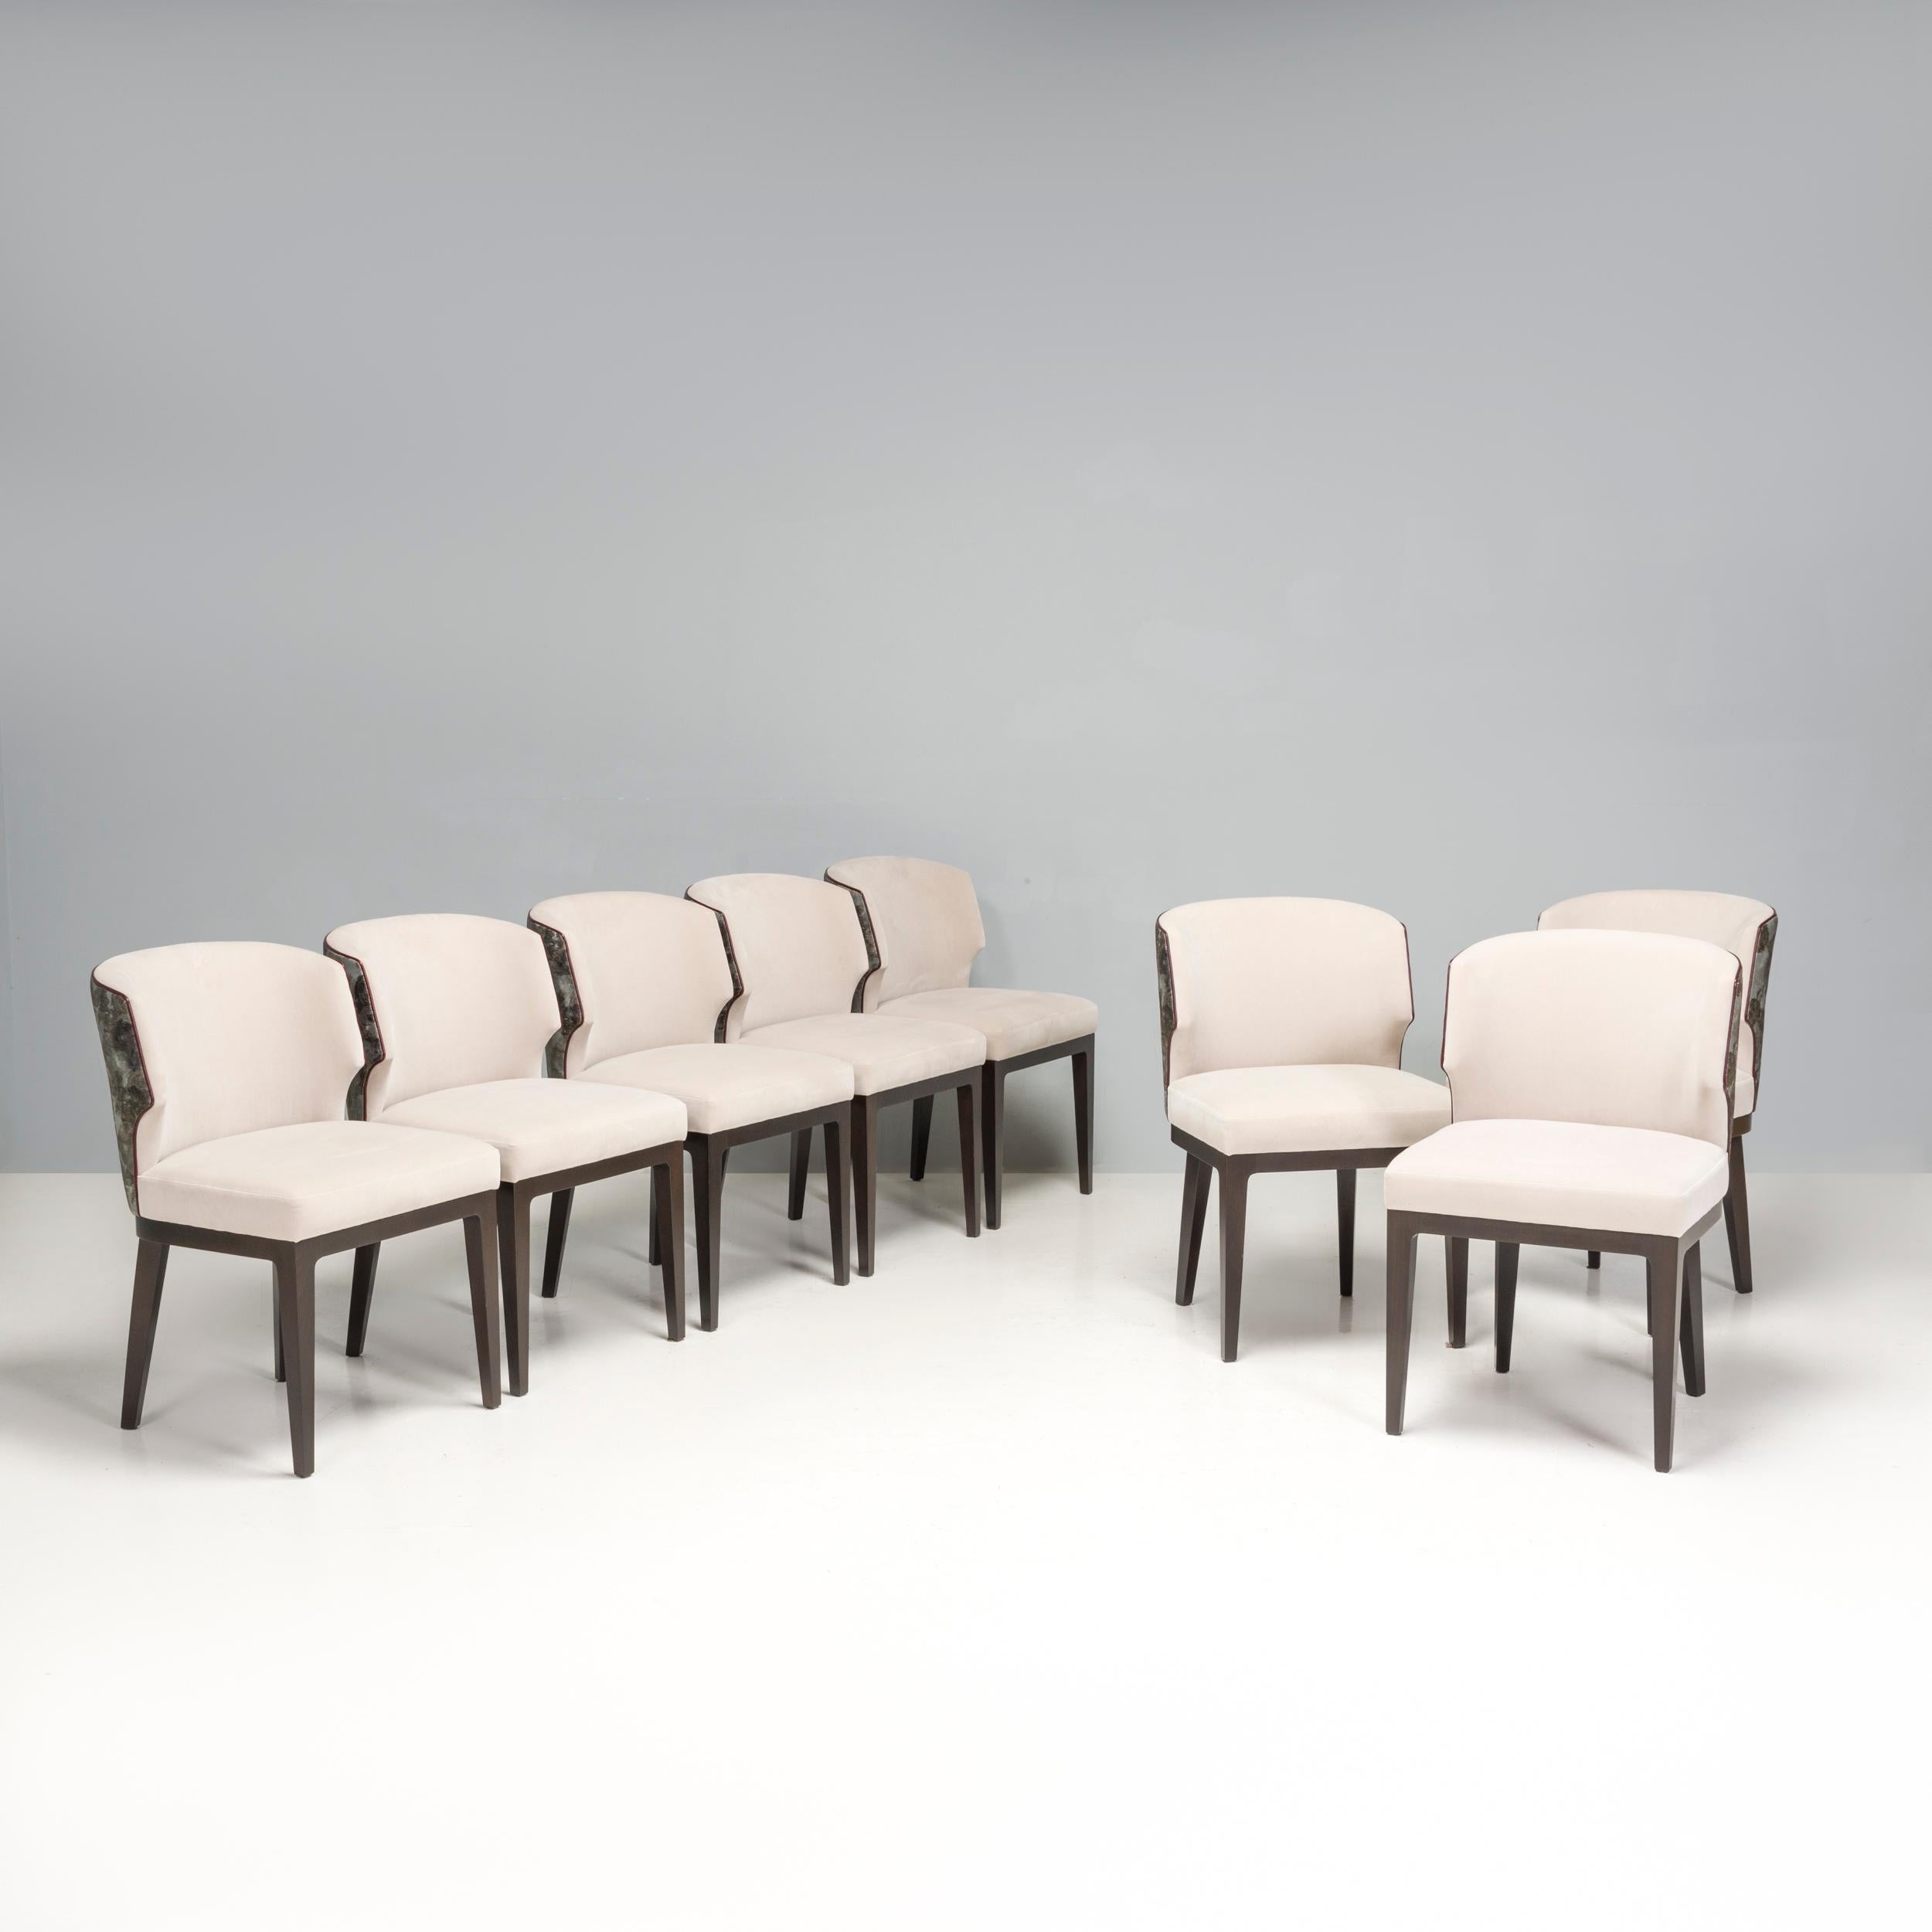 The company was founded in 1984 by Dennis Miller, an architect, who successfully brought out artist and architect-created furniture that embodied modern design ideals. 

Part of the Anees collection this set of Lasalle dining chairs is upholstered